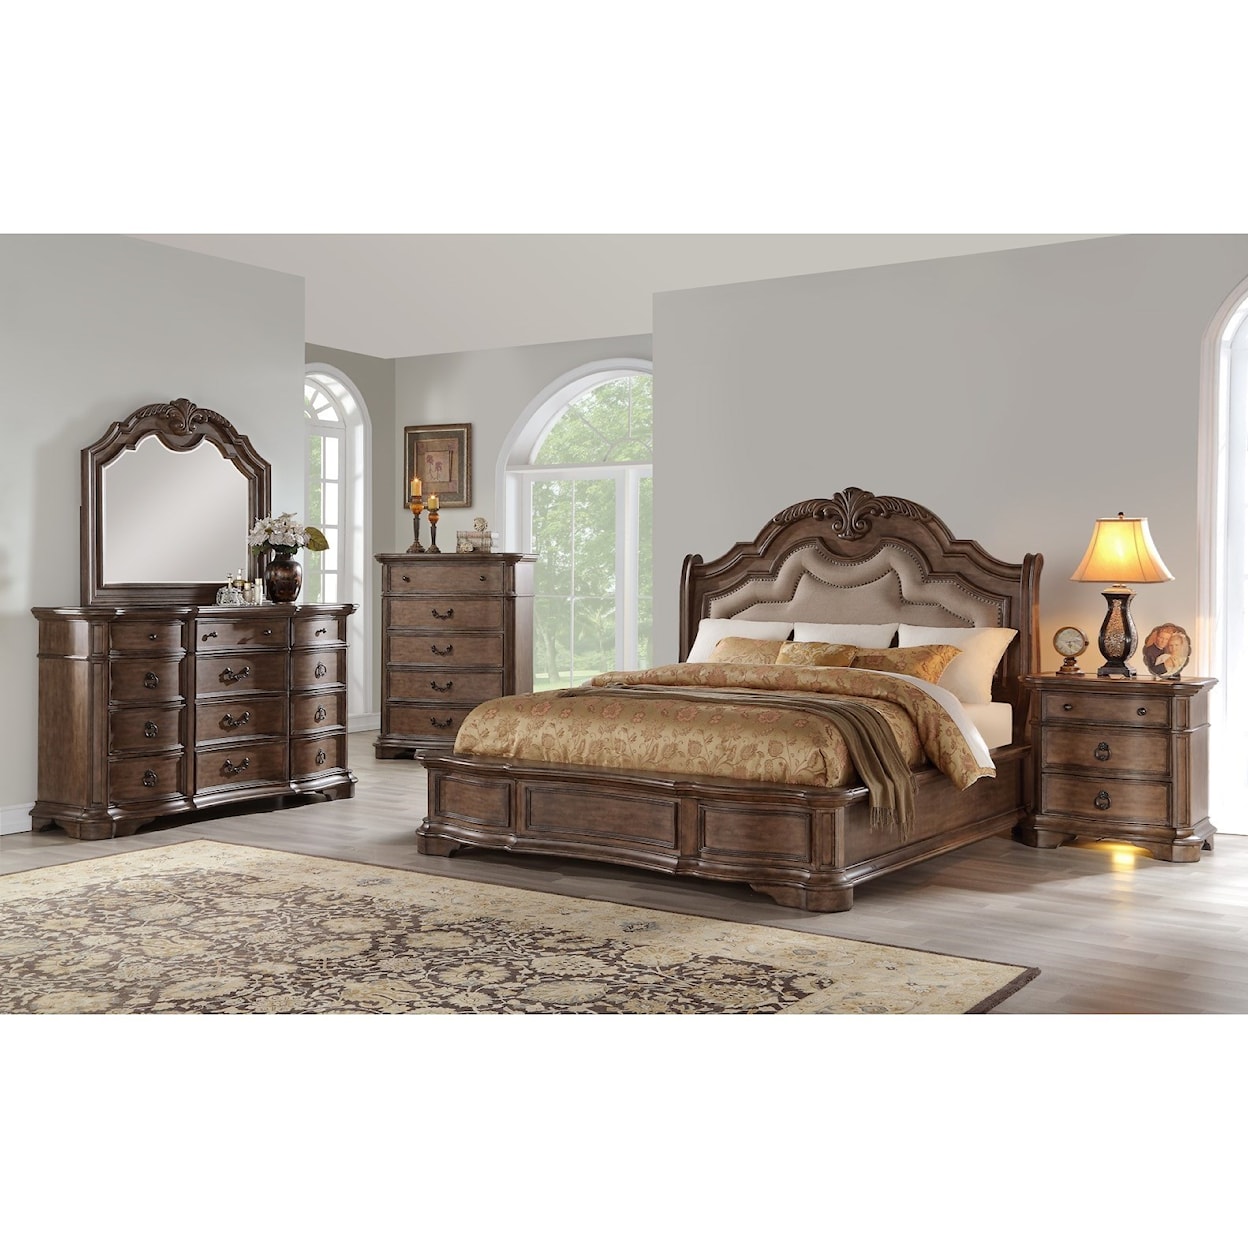 Avalon Furniture Tulsa Queen Bedroom Group